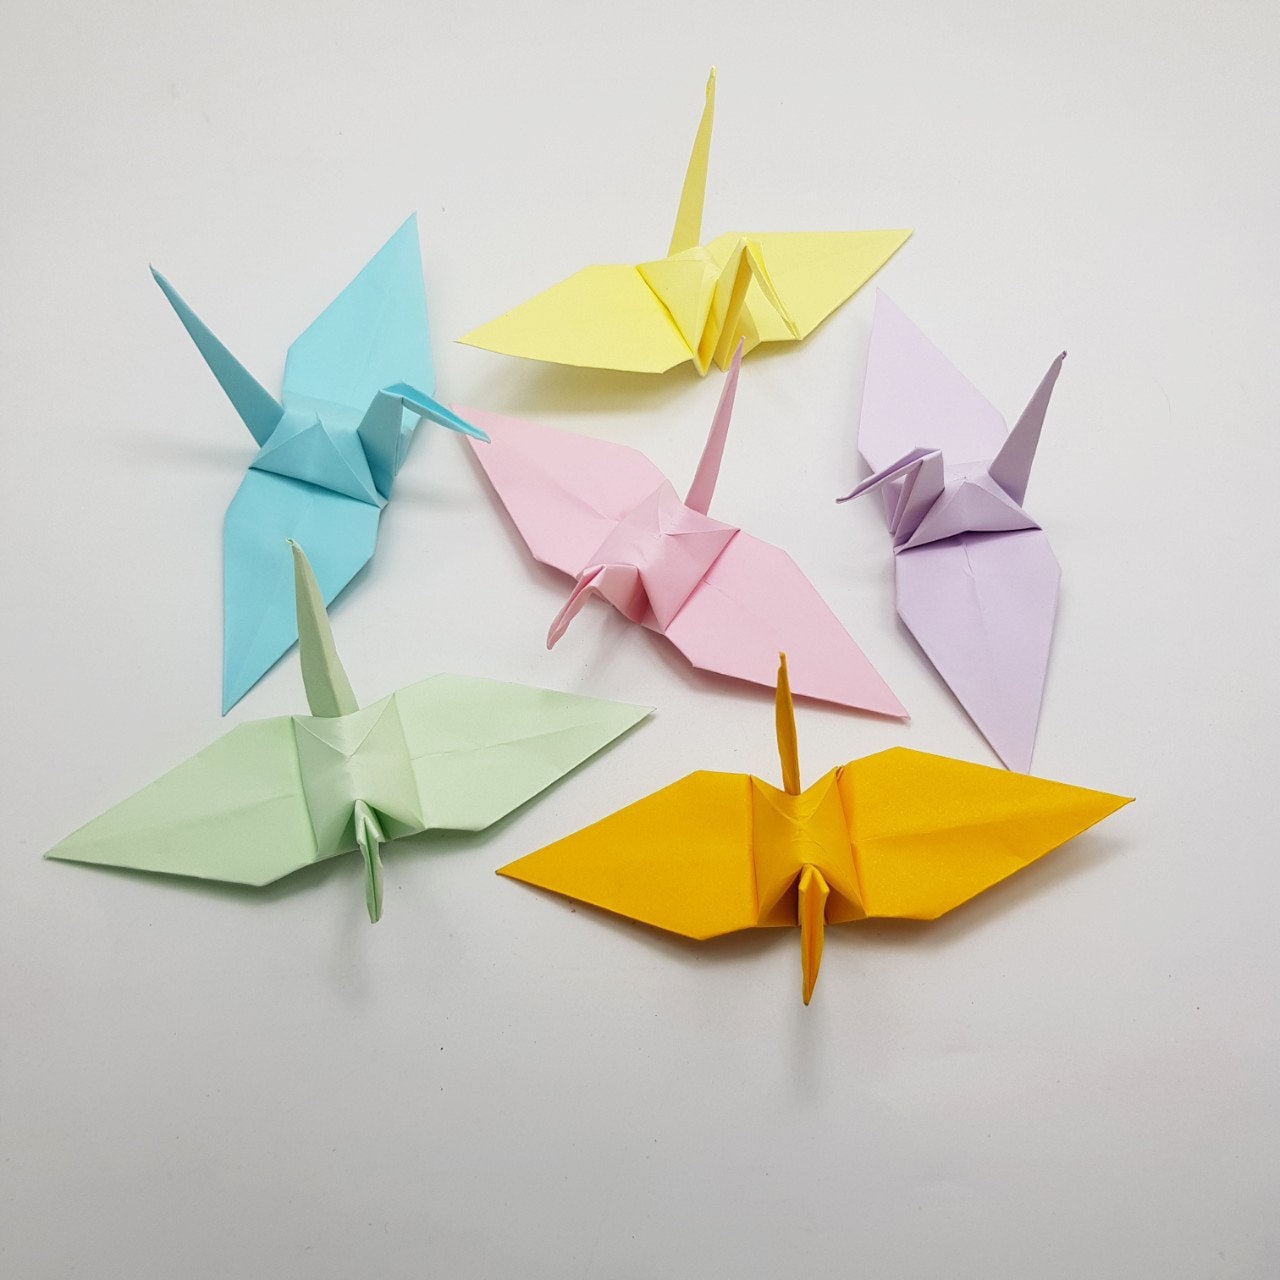 50 Origami Paper Cranes Mixed color Sweet color Large 6 inches